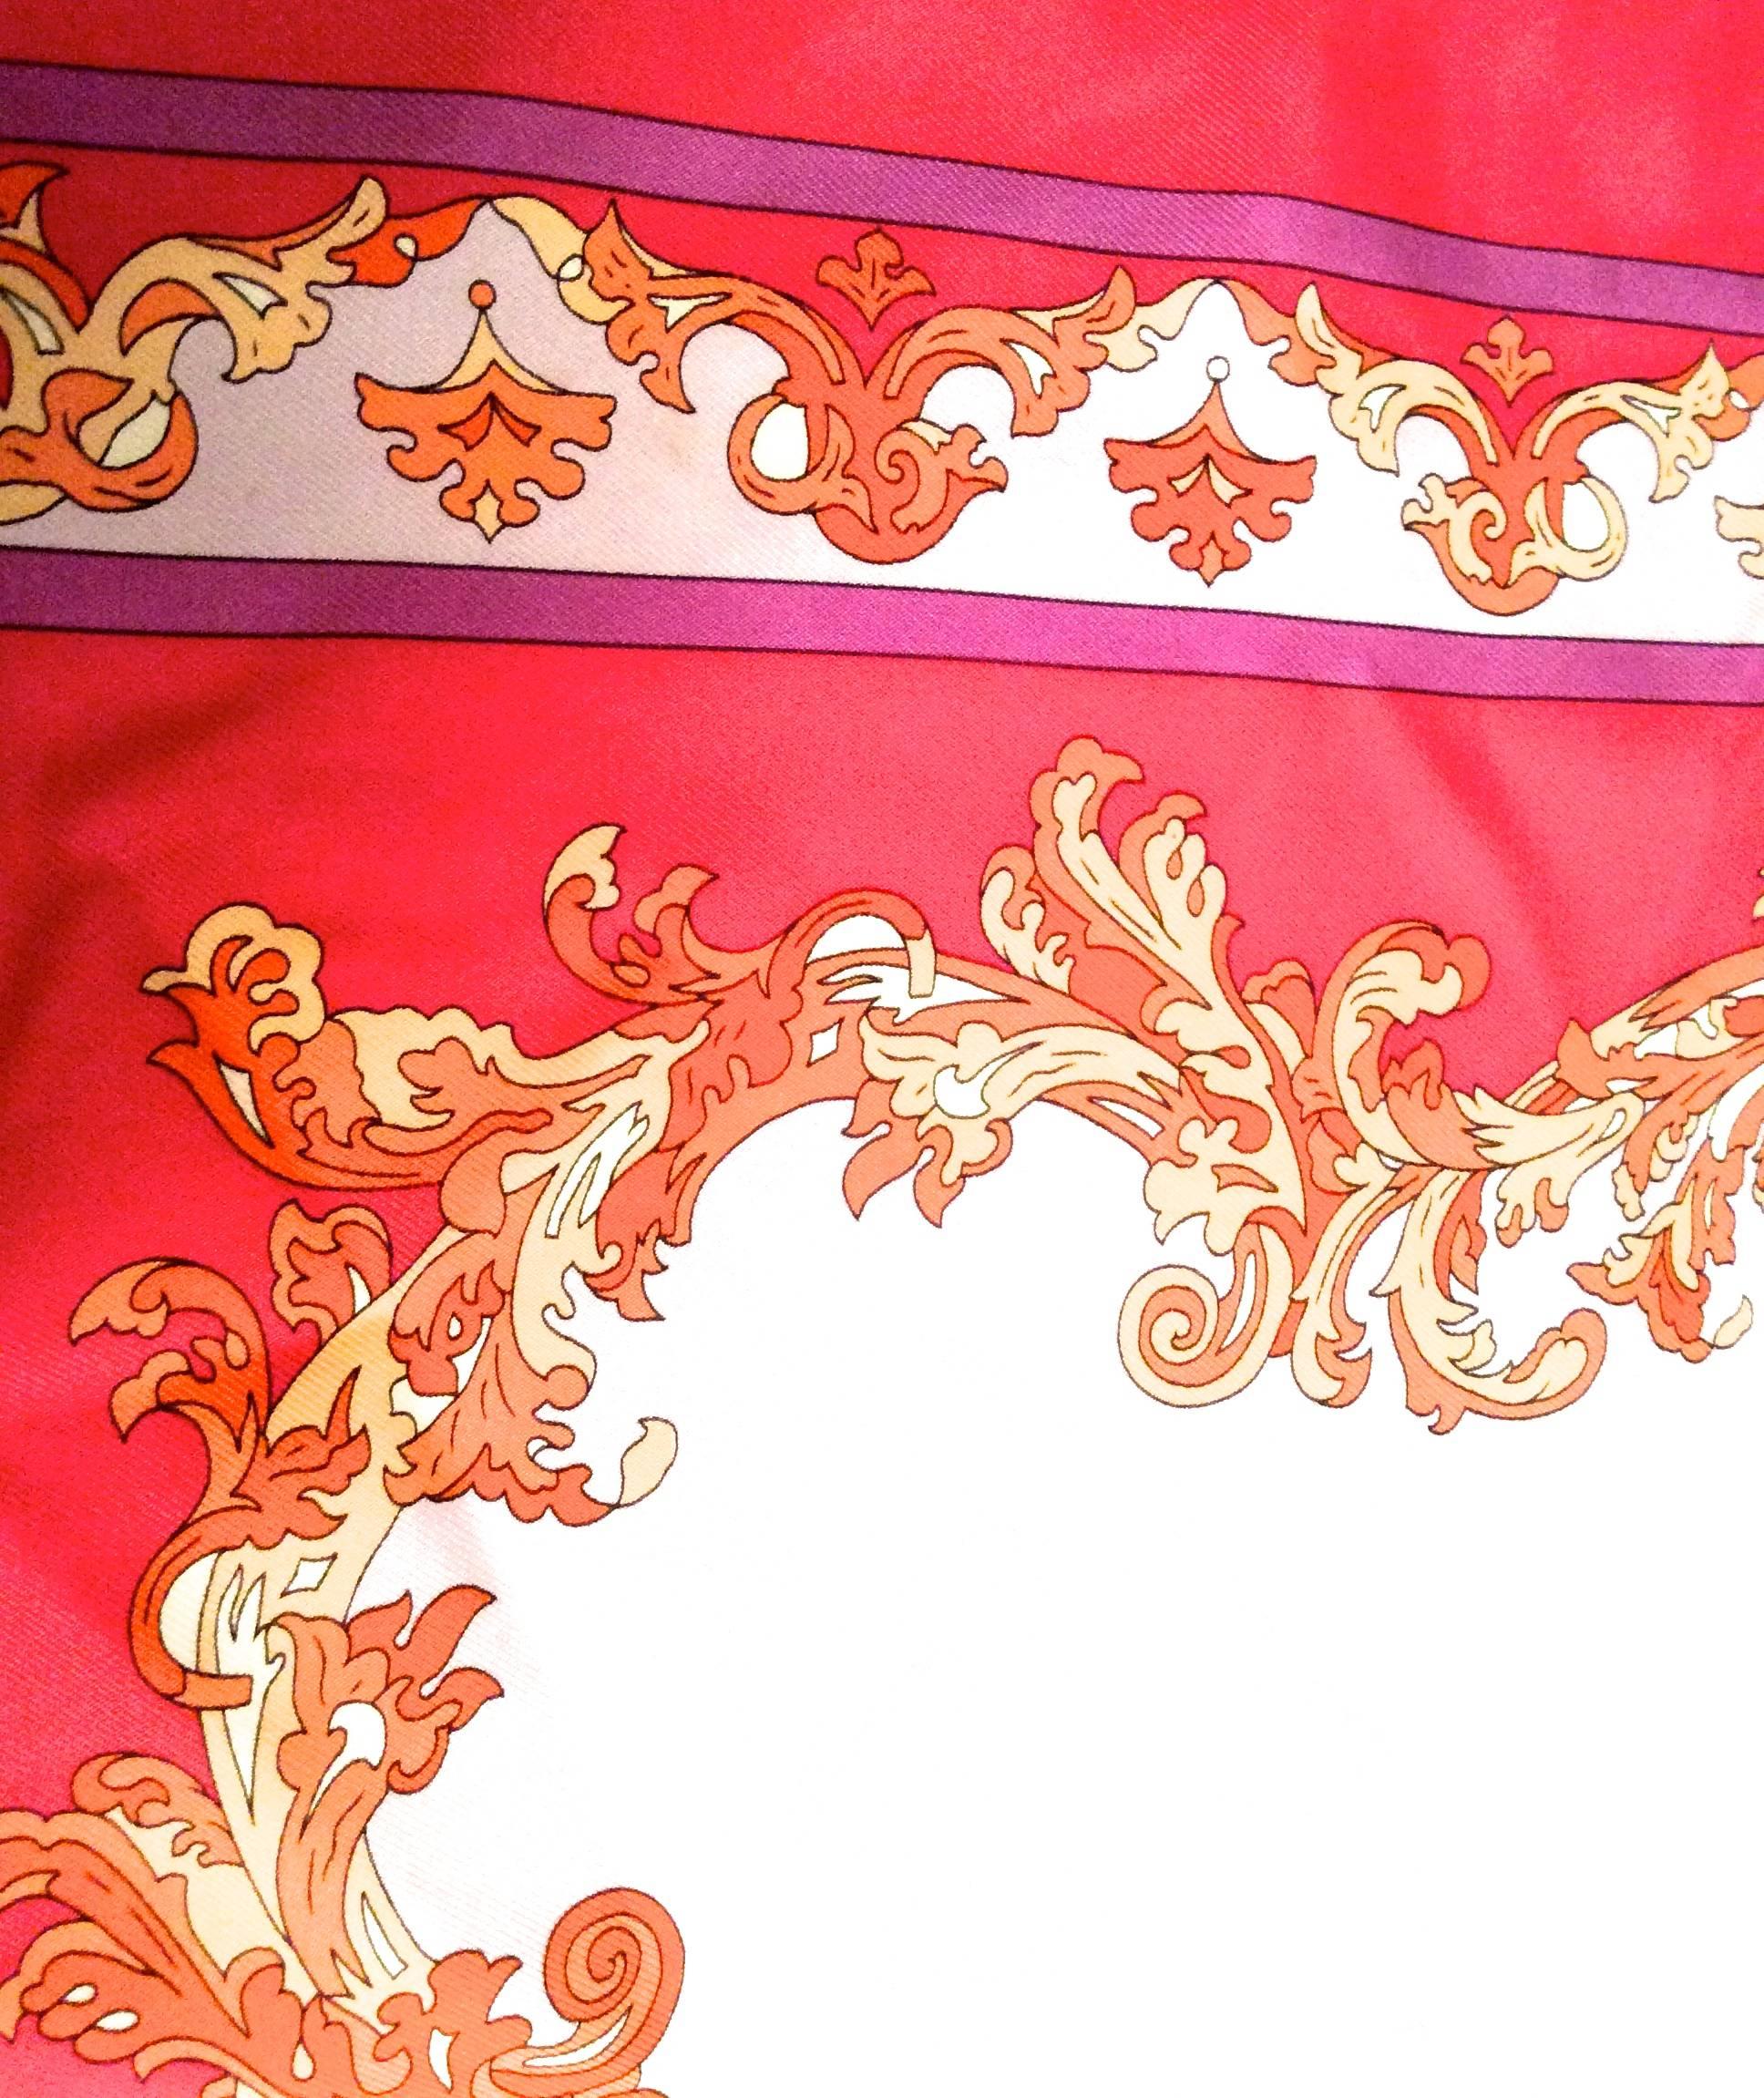 Presented here is a new Emilio Pucci silk scarf. The scarf is a combination of shades of red, purple, orange, and tan. The design is an ornate curved leaf-shape design separating the main colors of the scarf. There is a diamond / ovular shape in the